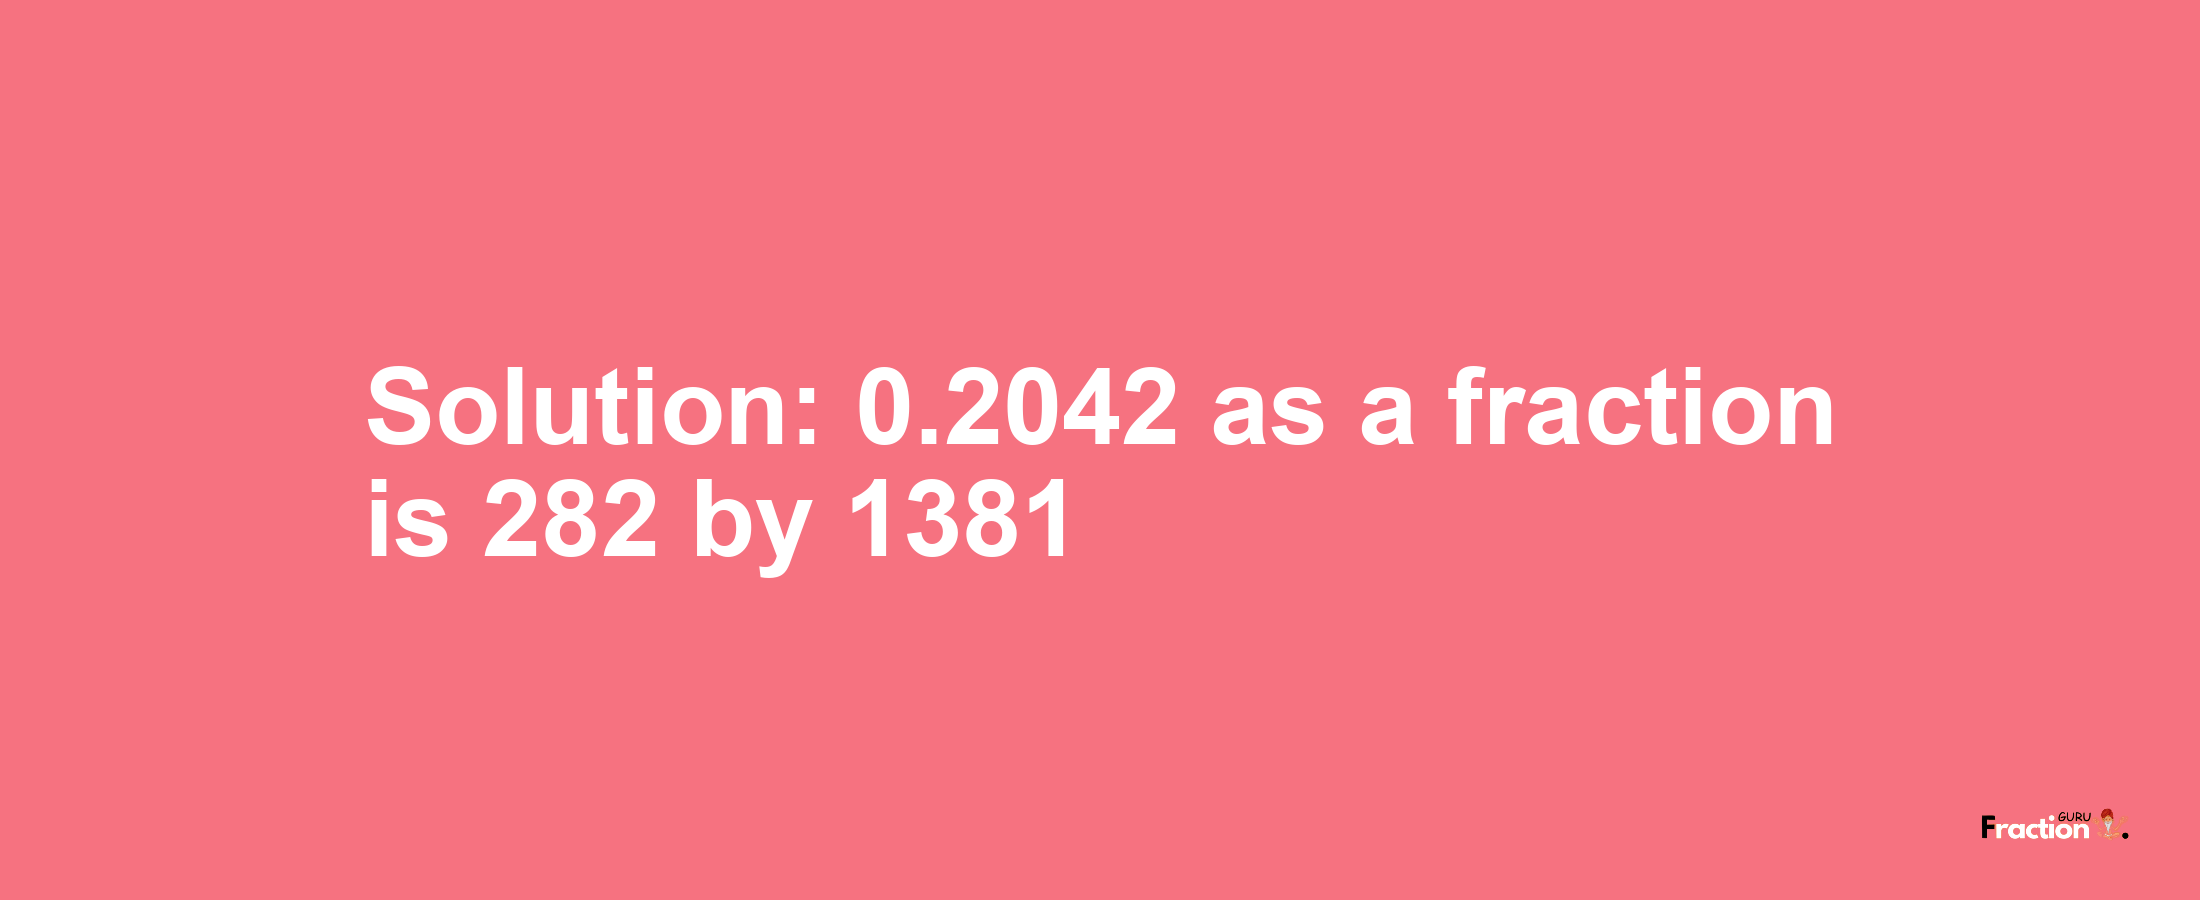 Solution:0.2042 as a fraction is 282/1381